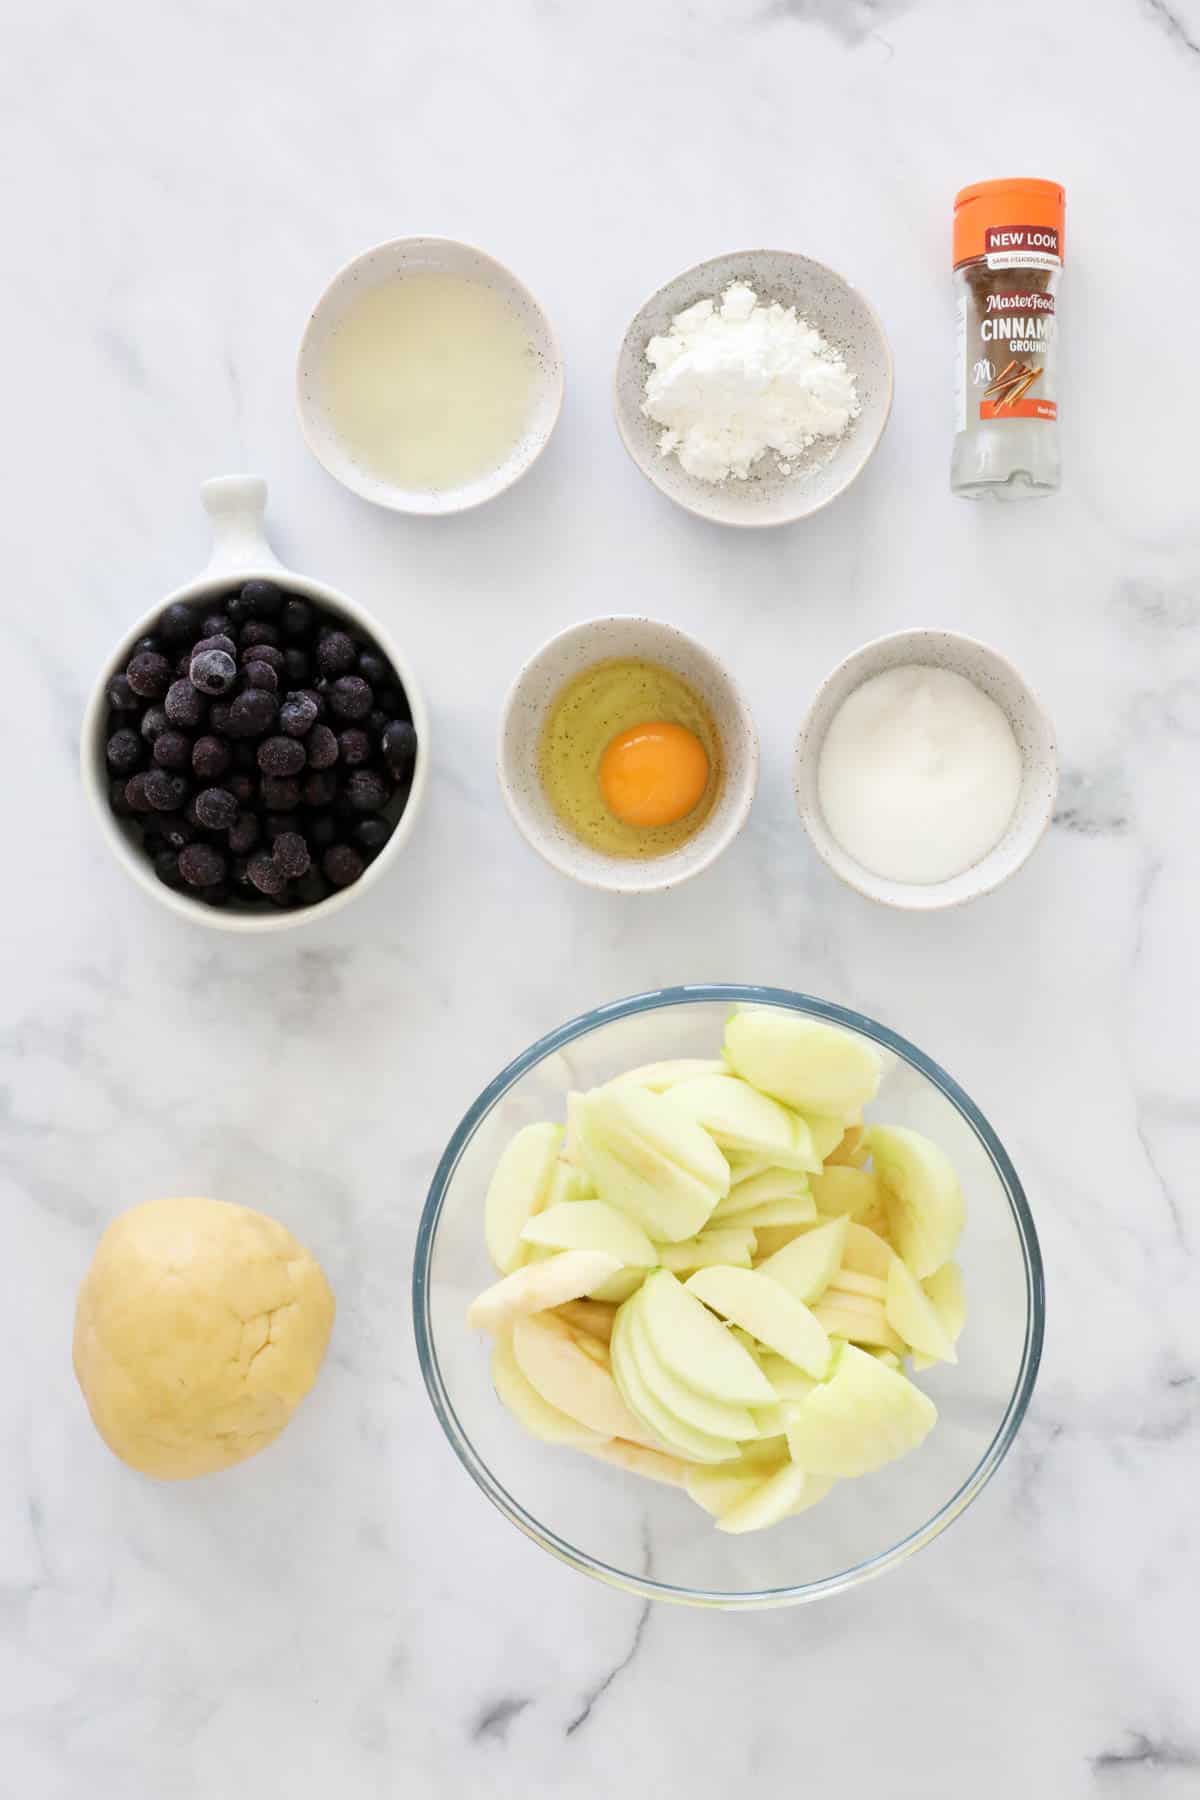 Ingredients needed to make the filling of the apple and blueberry pie weighed out and placed in individual bowls.